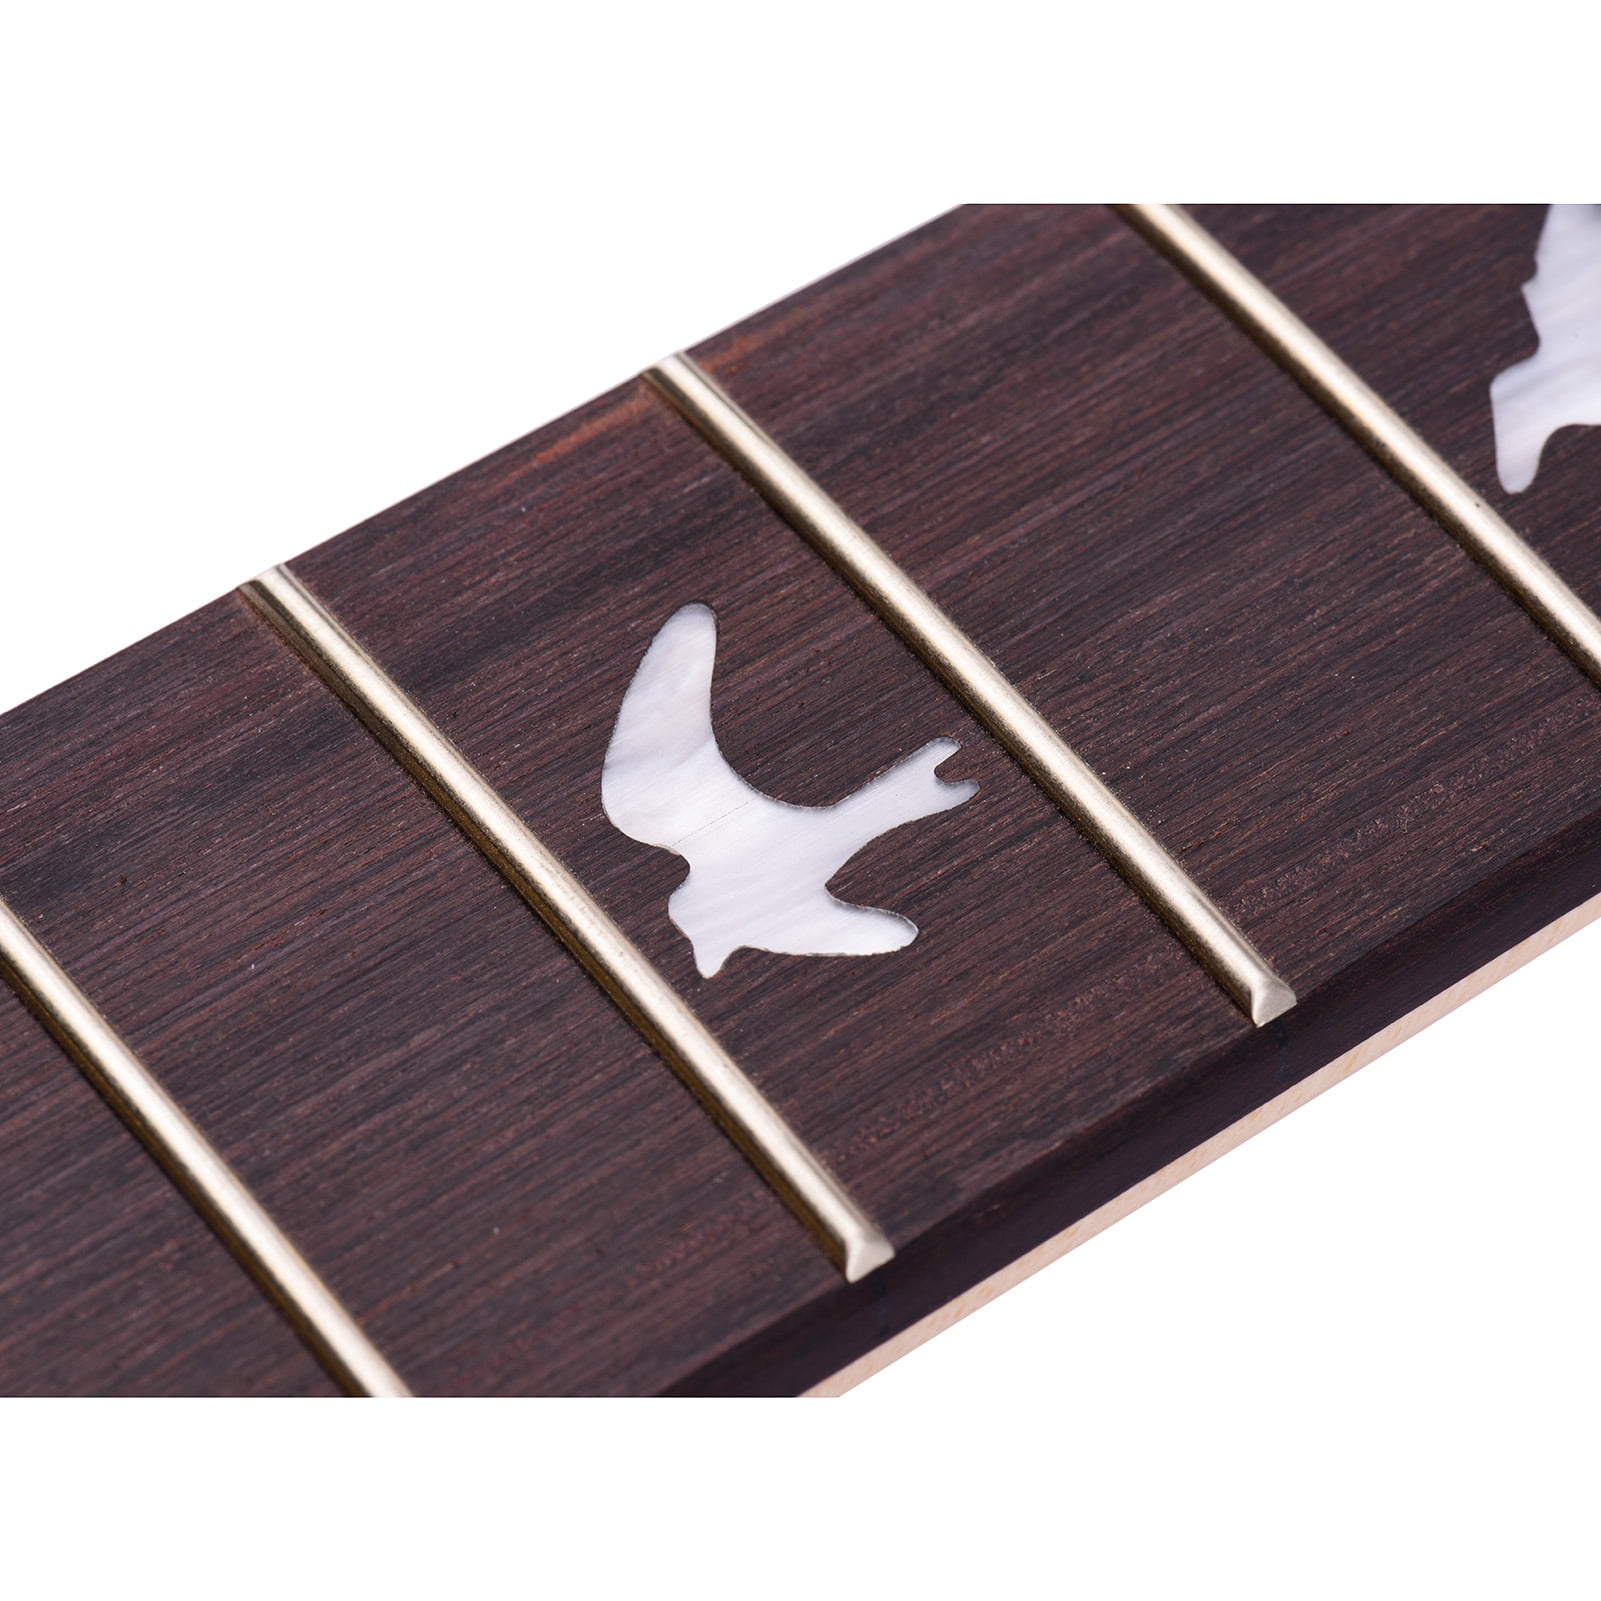 ABMBERTK Universal Unfinished Electric Guitar Neck 22 Frets Maple Wood Fingerboard with White Birds Inlay Replacement,Wood